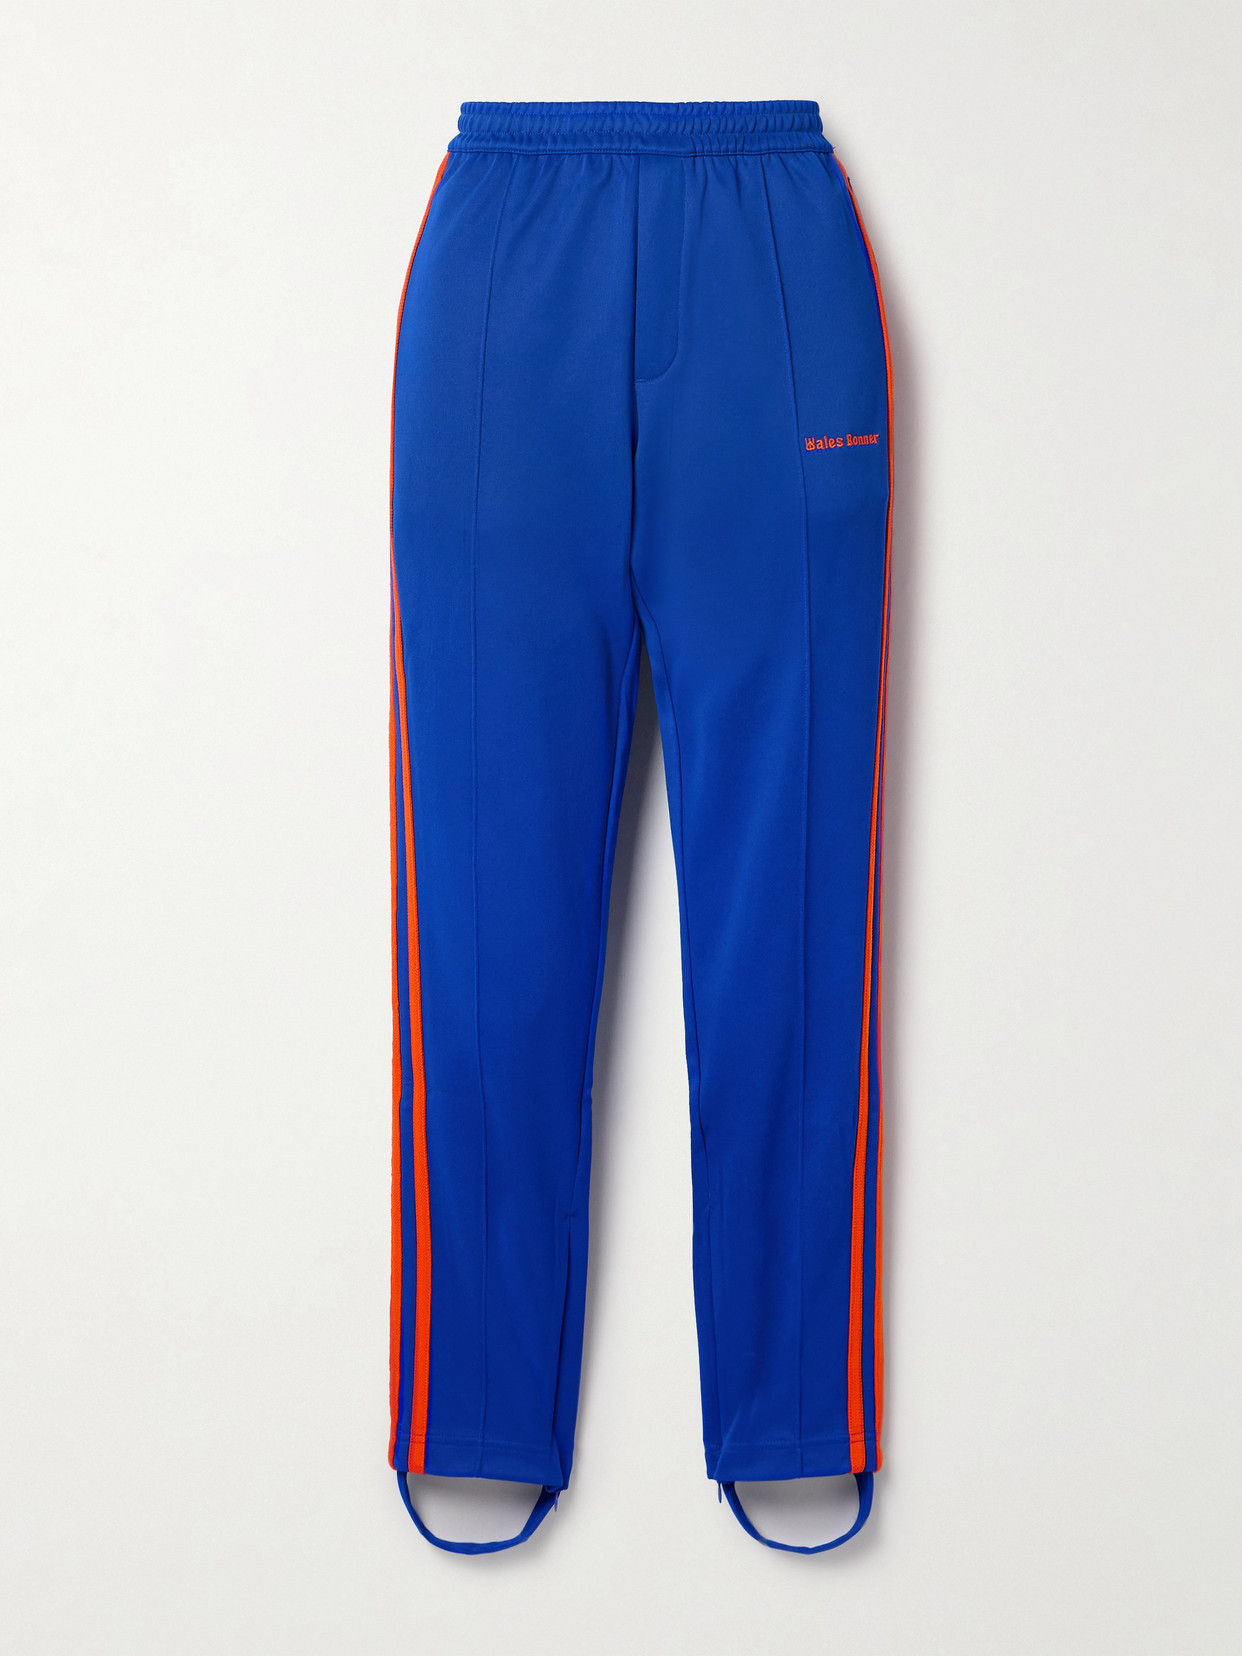 + Wales Bonner Embroidered Striped Recycled-Jersey Track Pants